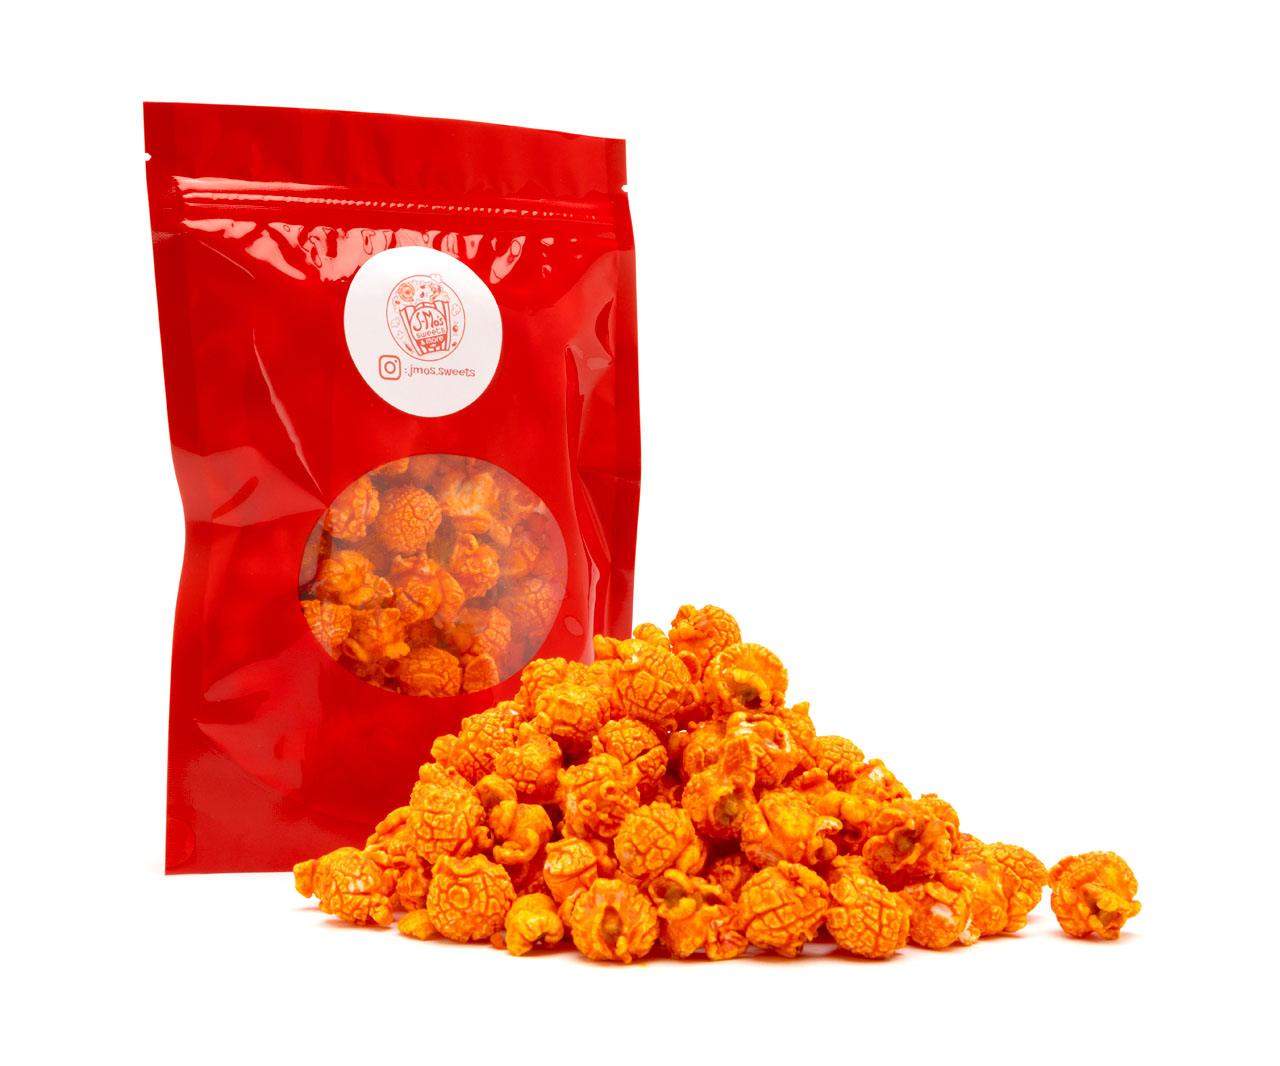 Fiery Spice - J-Mo's Sweets & More